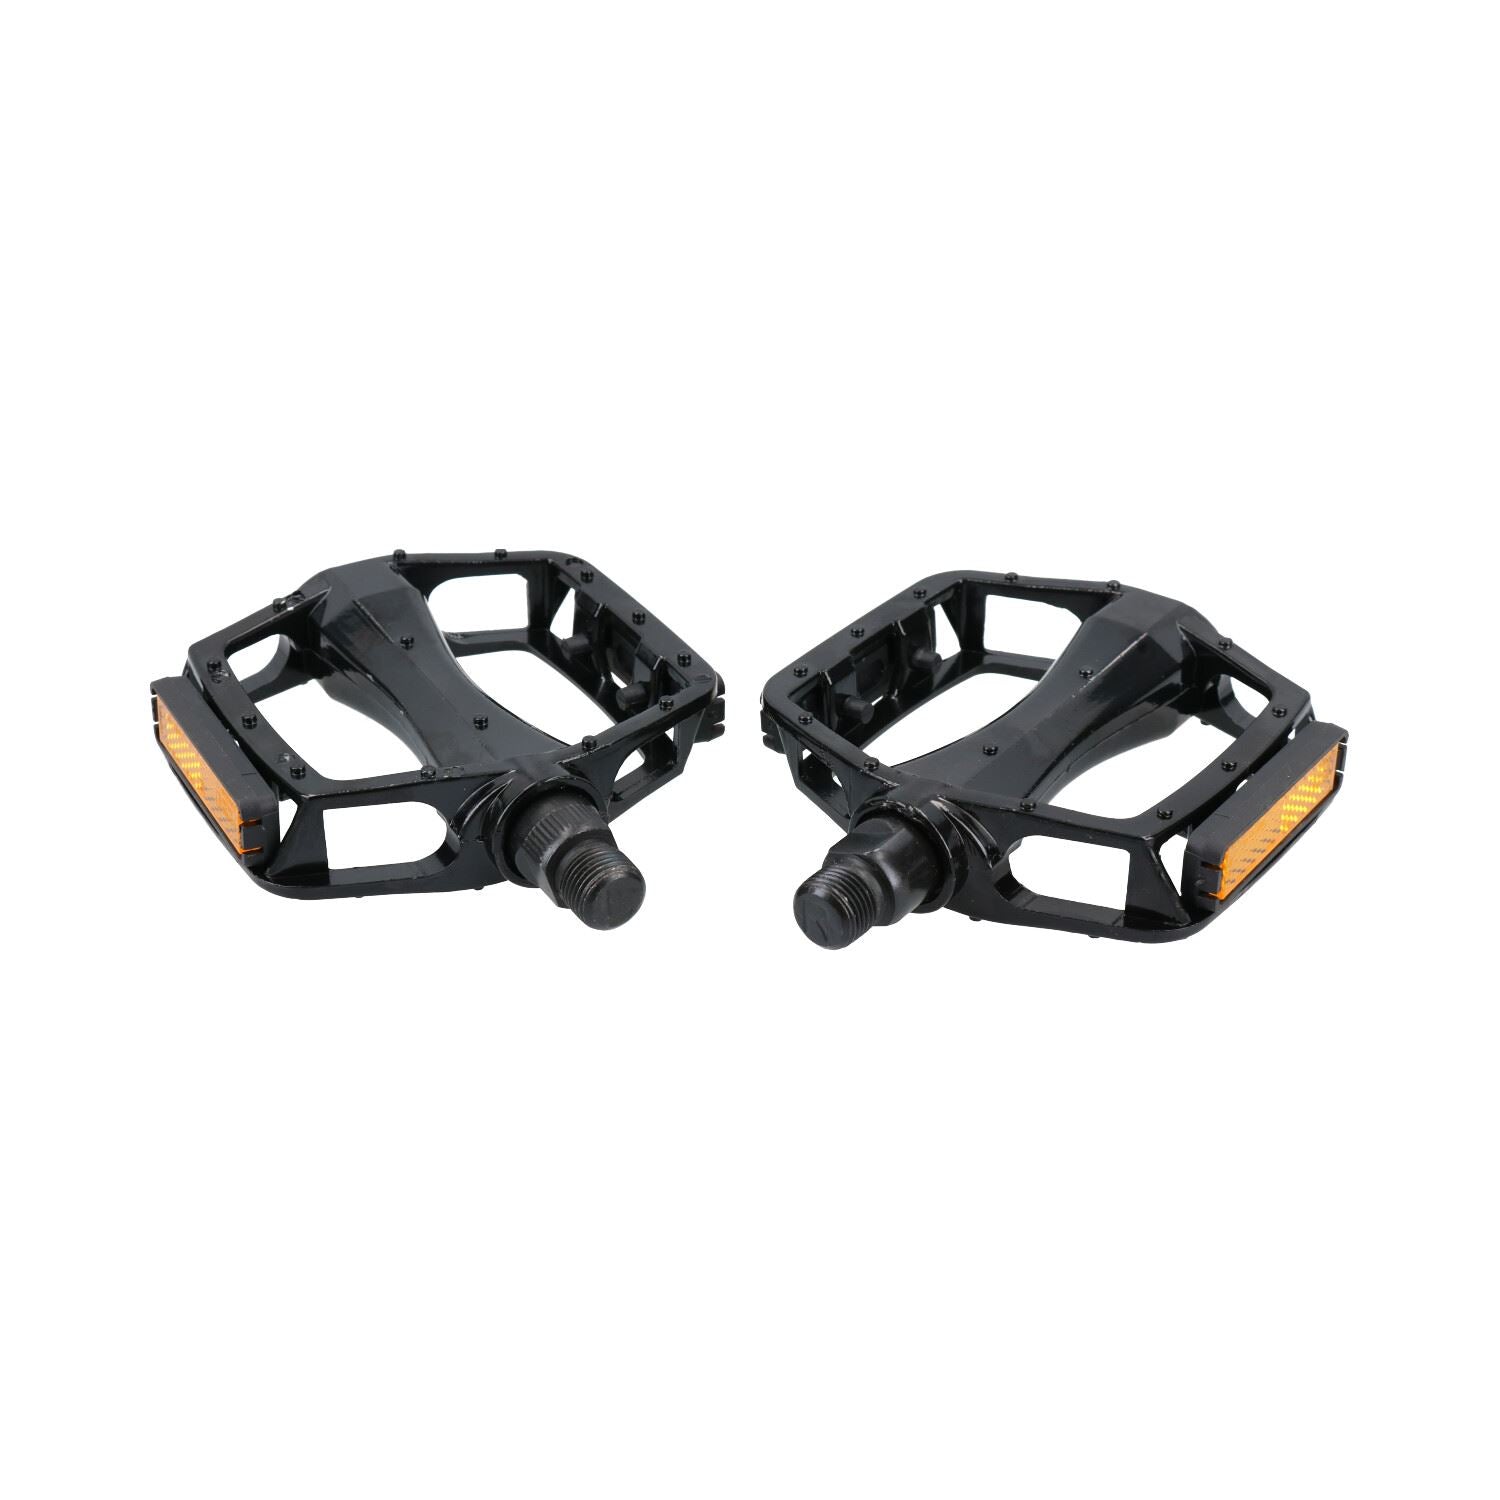 Alloy Platform Pedals 9/16" Mountain Bicycle Cycle Bike MTB Amber Reflectors